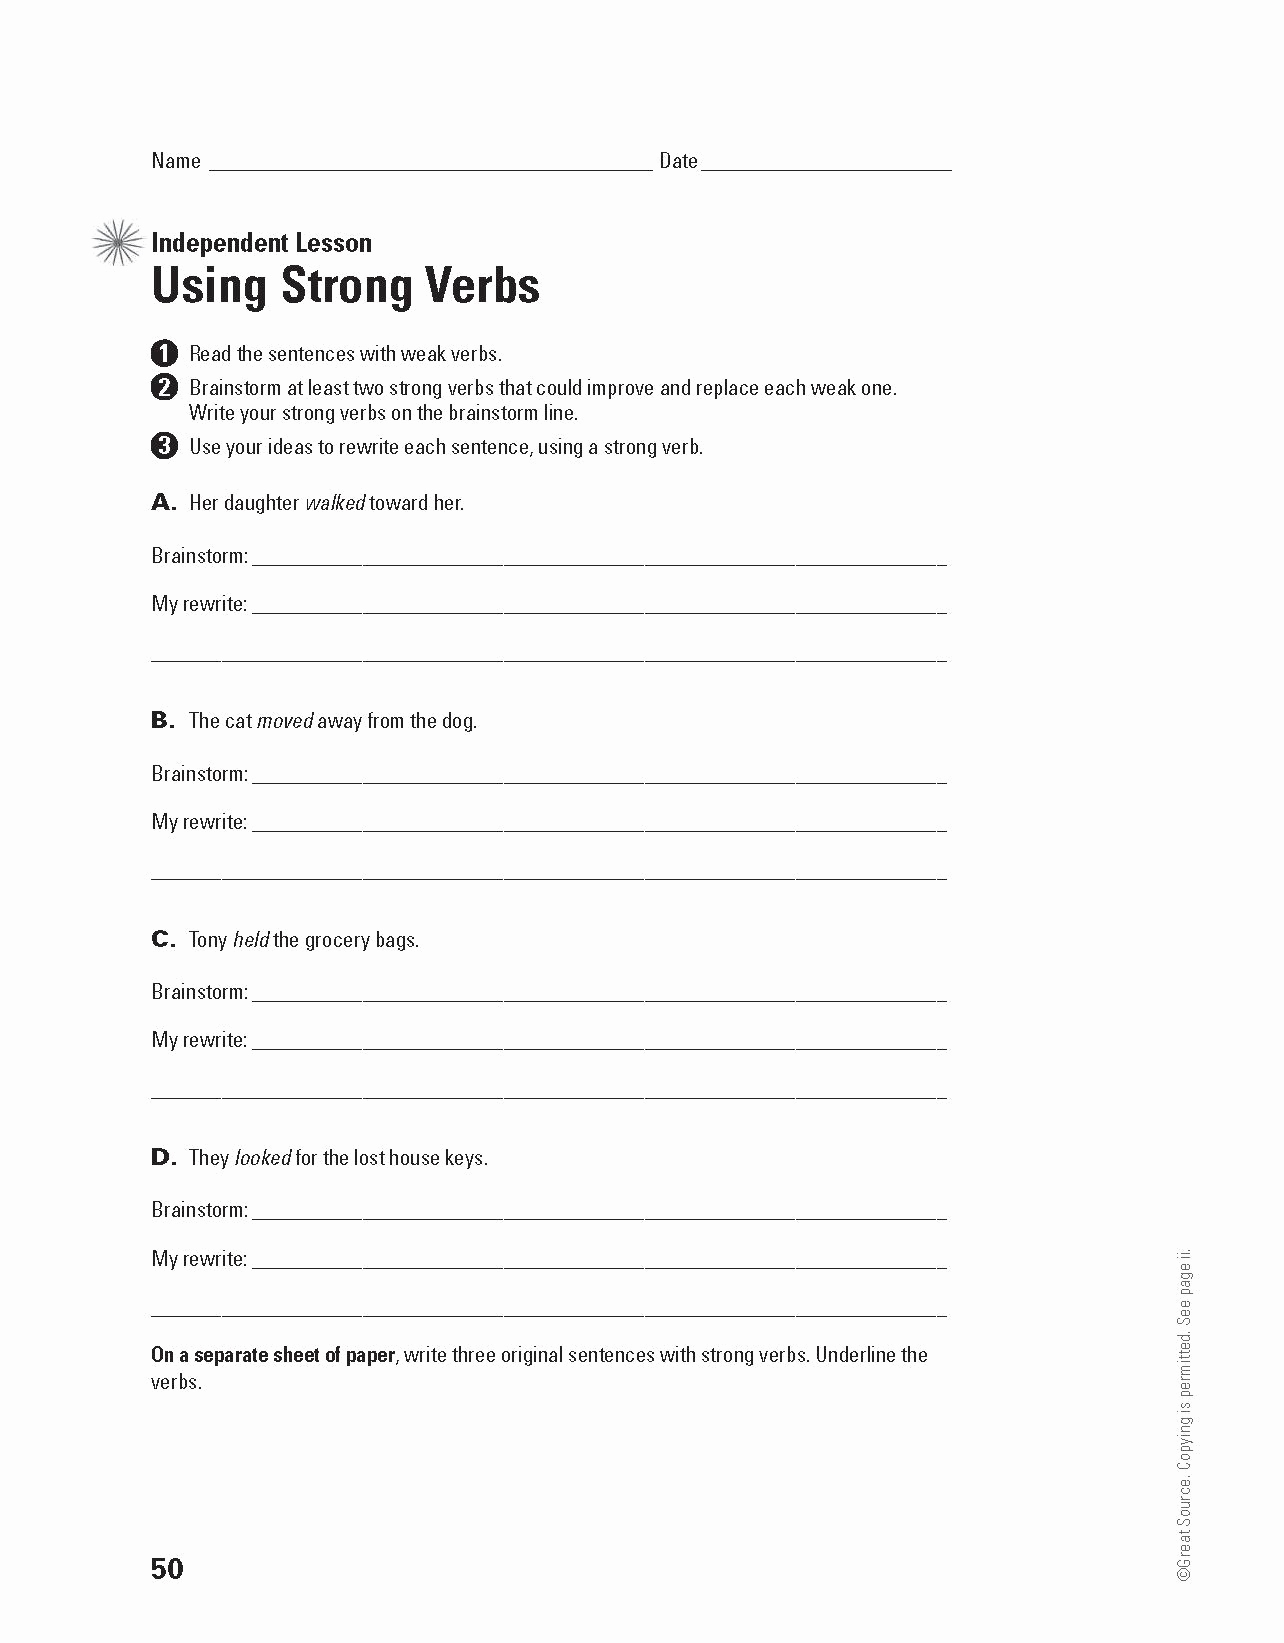 Verbs Worksheets for Middle School New 20 Verbs Worksheets for Middle School